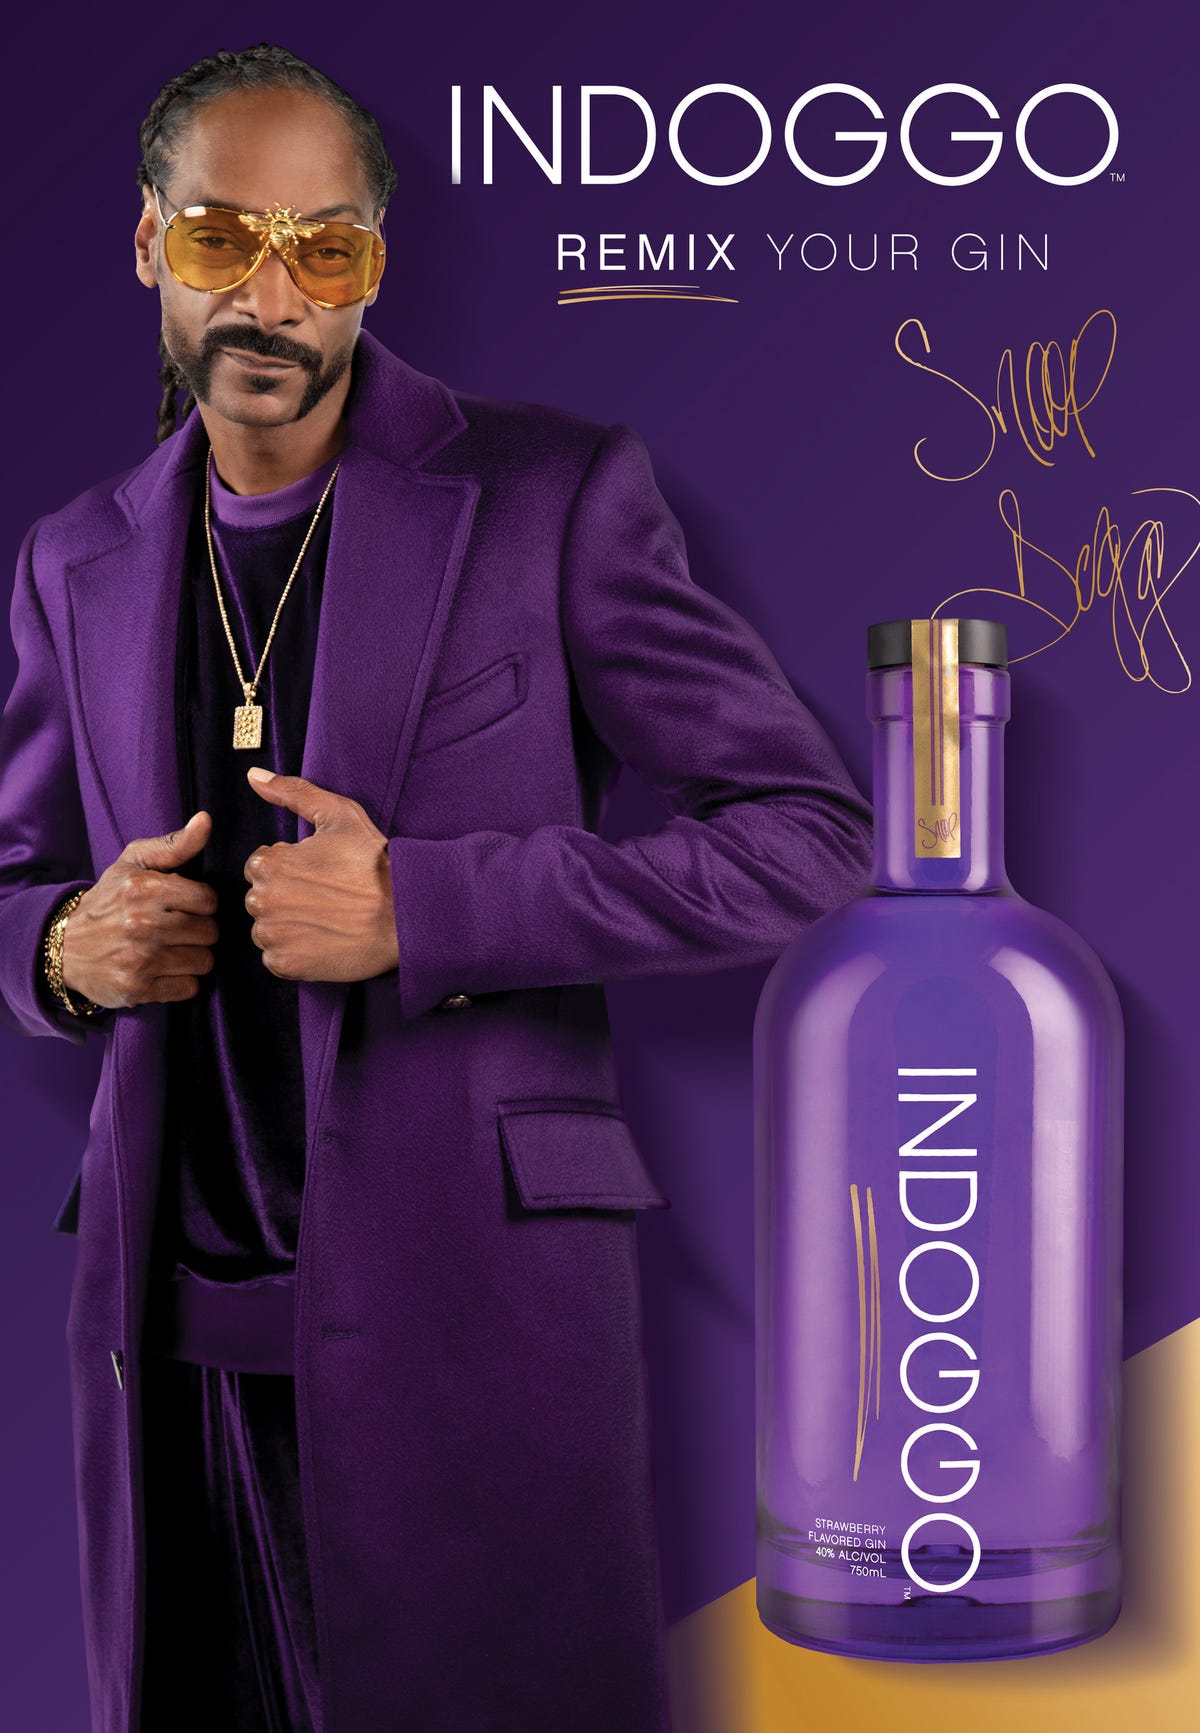 Snoop Dogg launches his own gin more than 25 years after 'Gin & Juice'